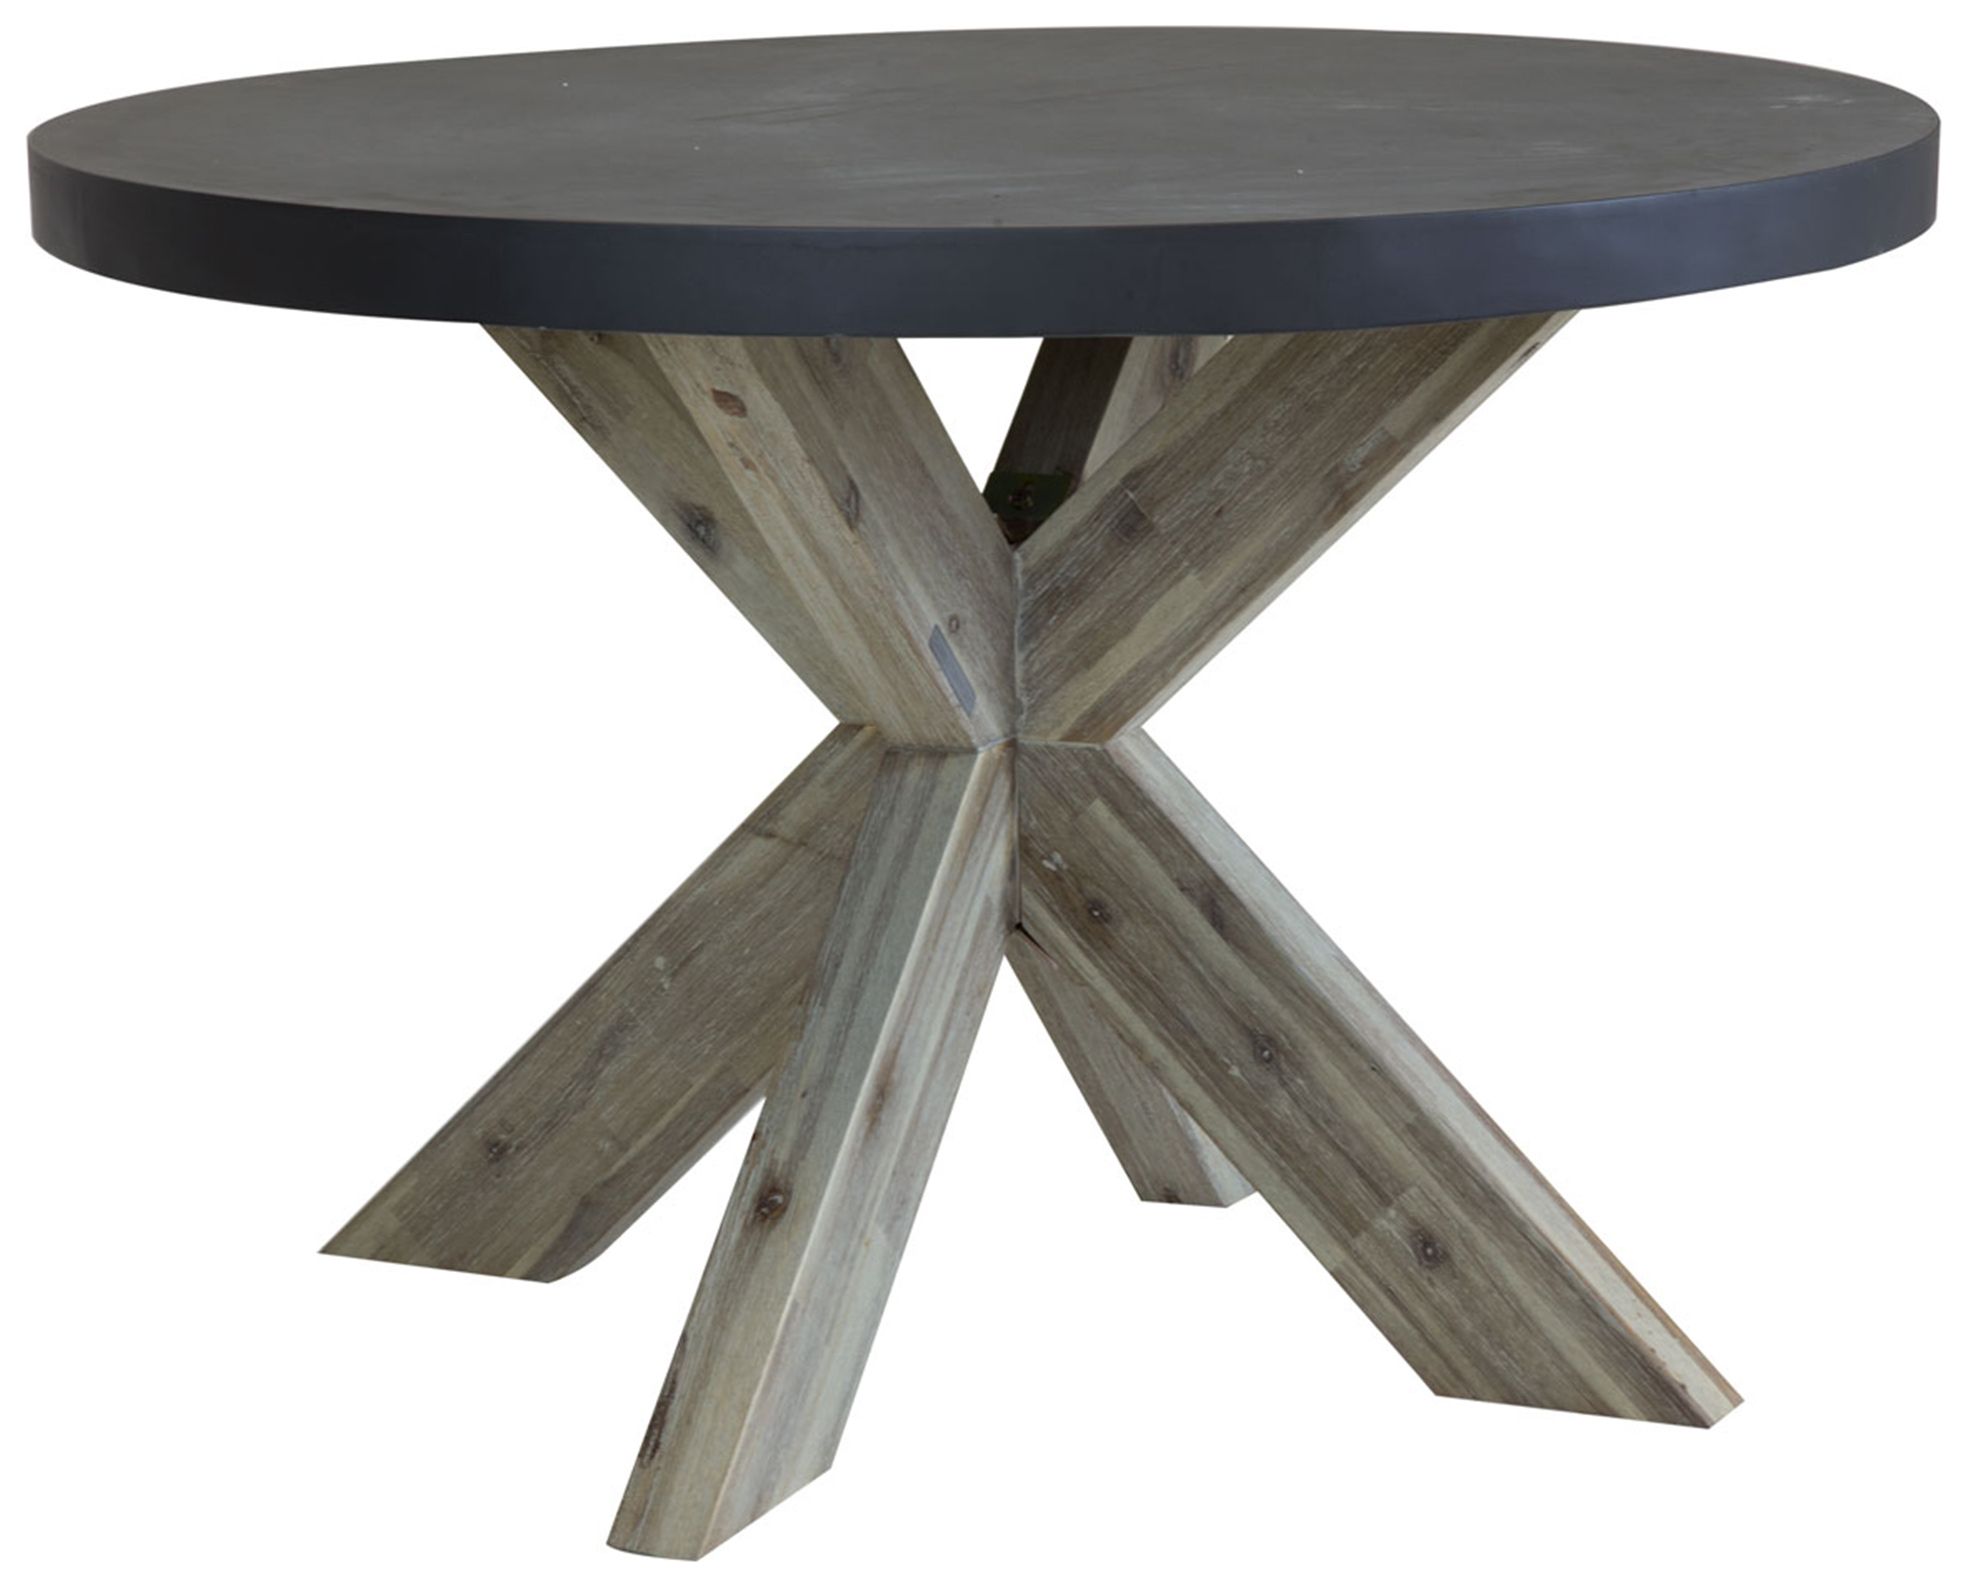 Charles Bentley Fibre Cement & Acacia Wood Round Garden Dining Table